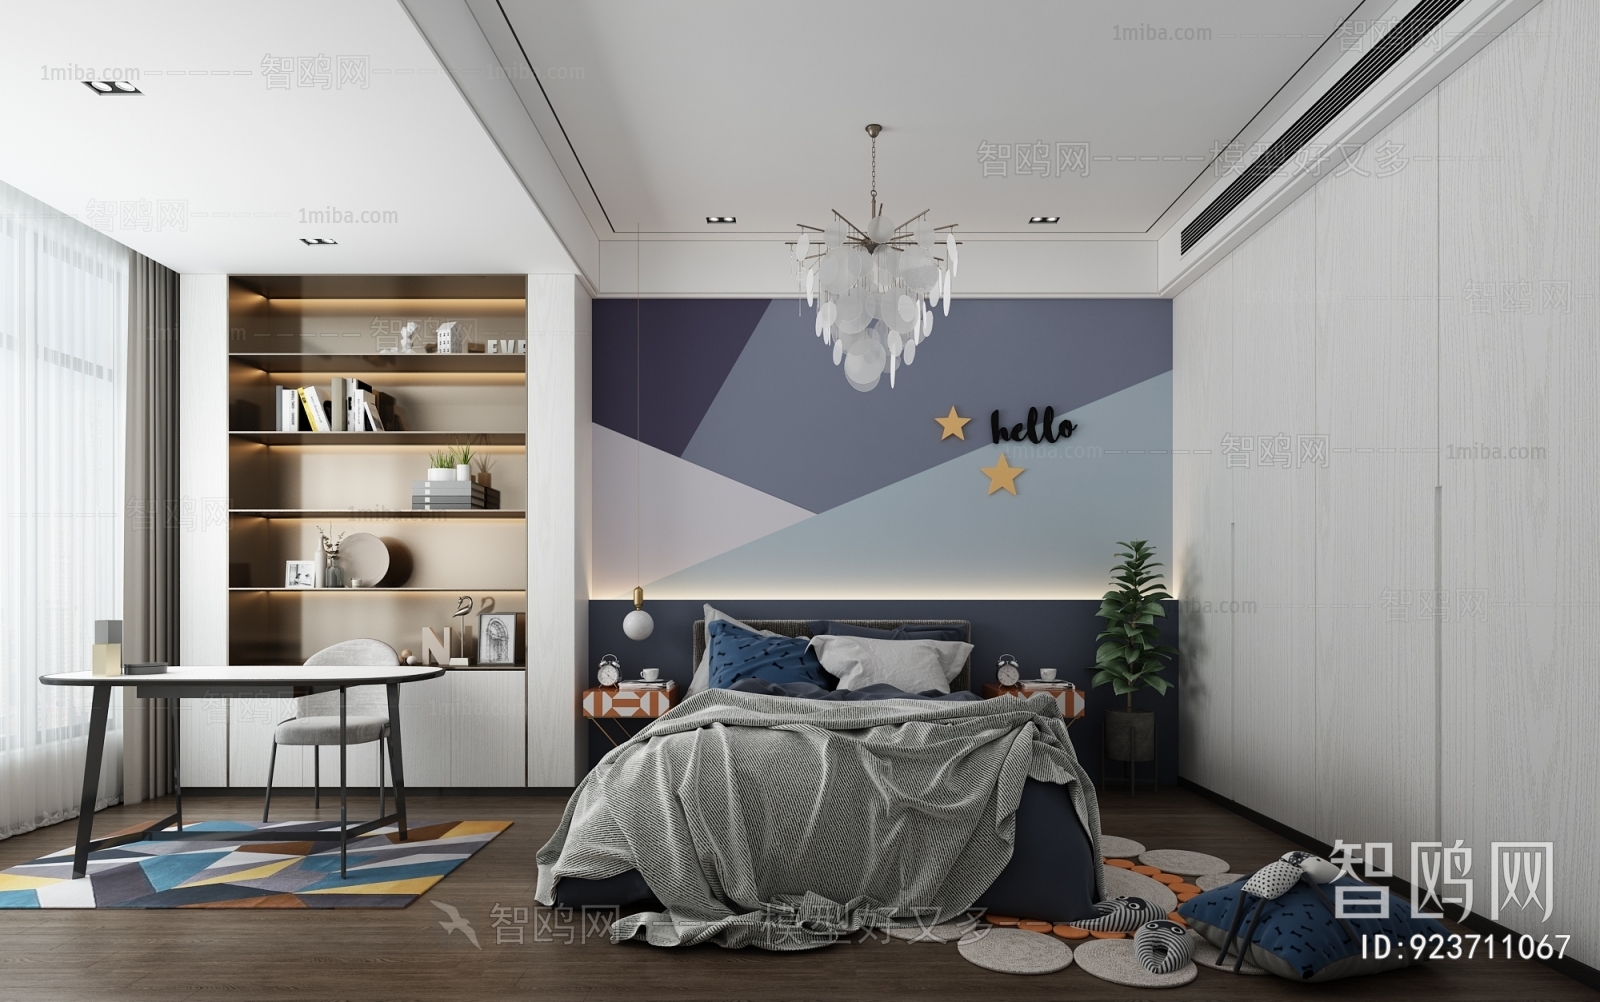 Modern Boy's Room And Son's Room